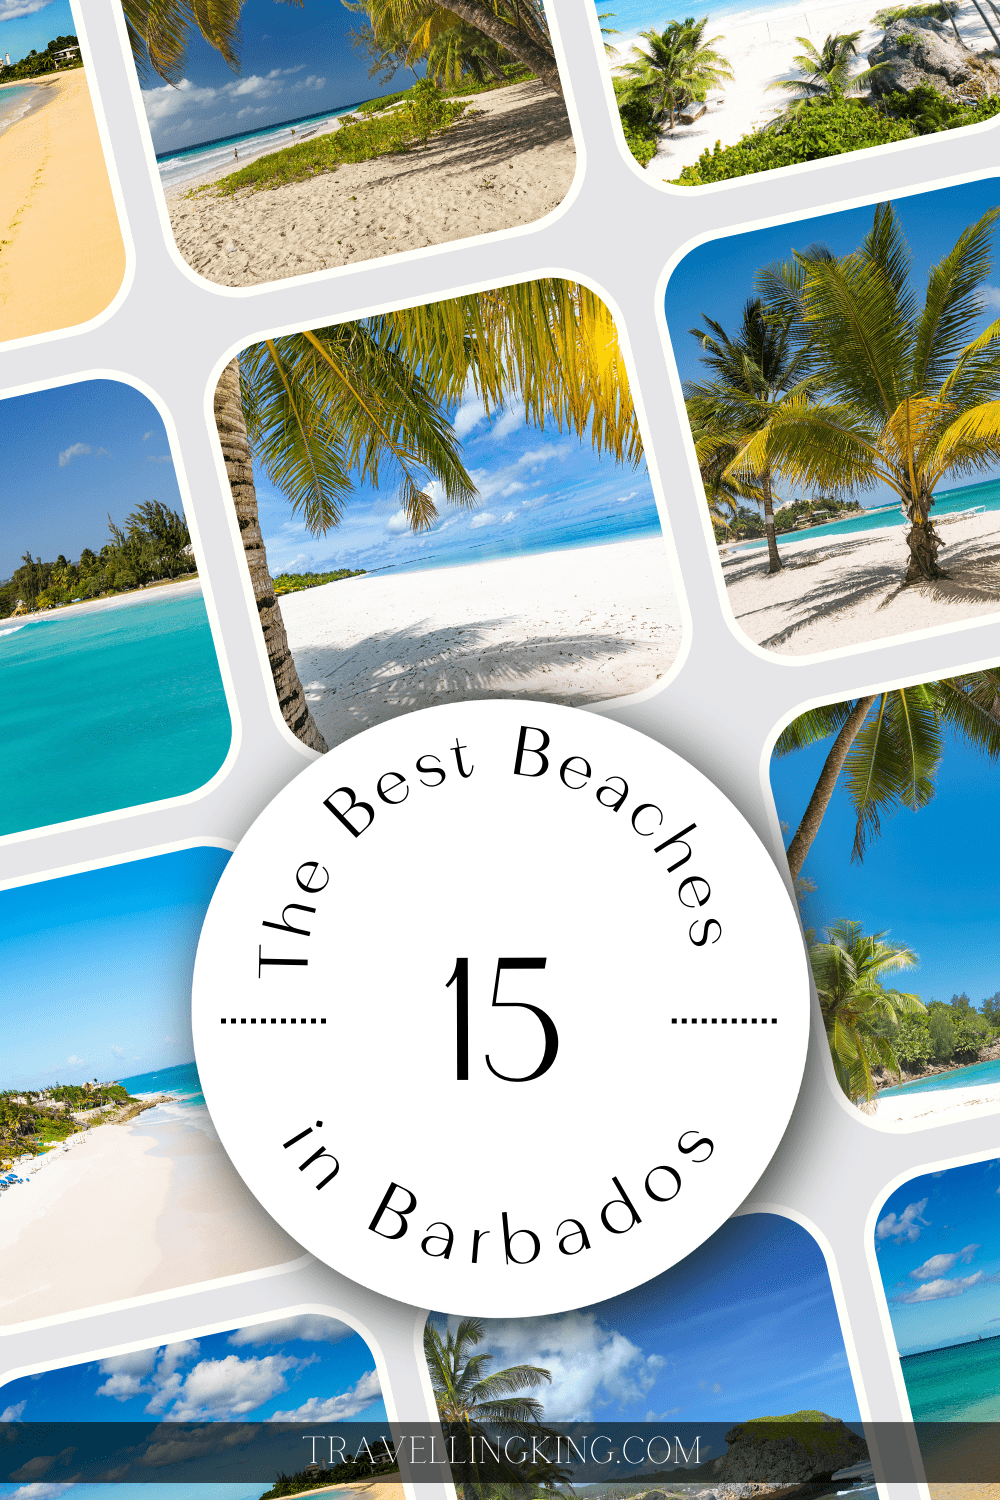 15 of the Best Beaches in Barbados